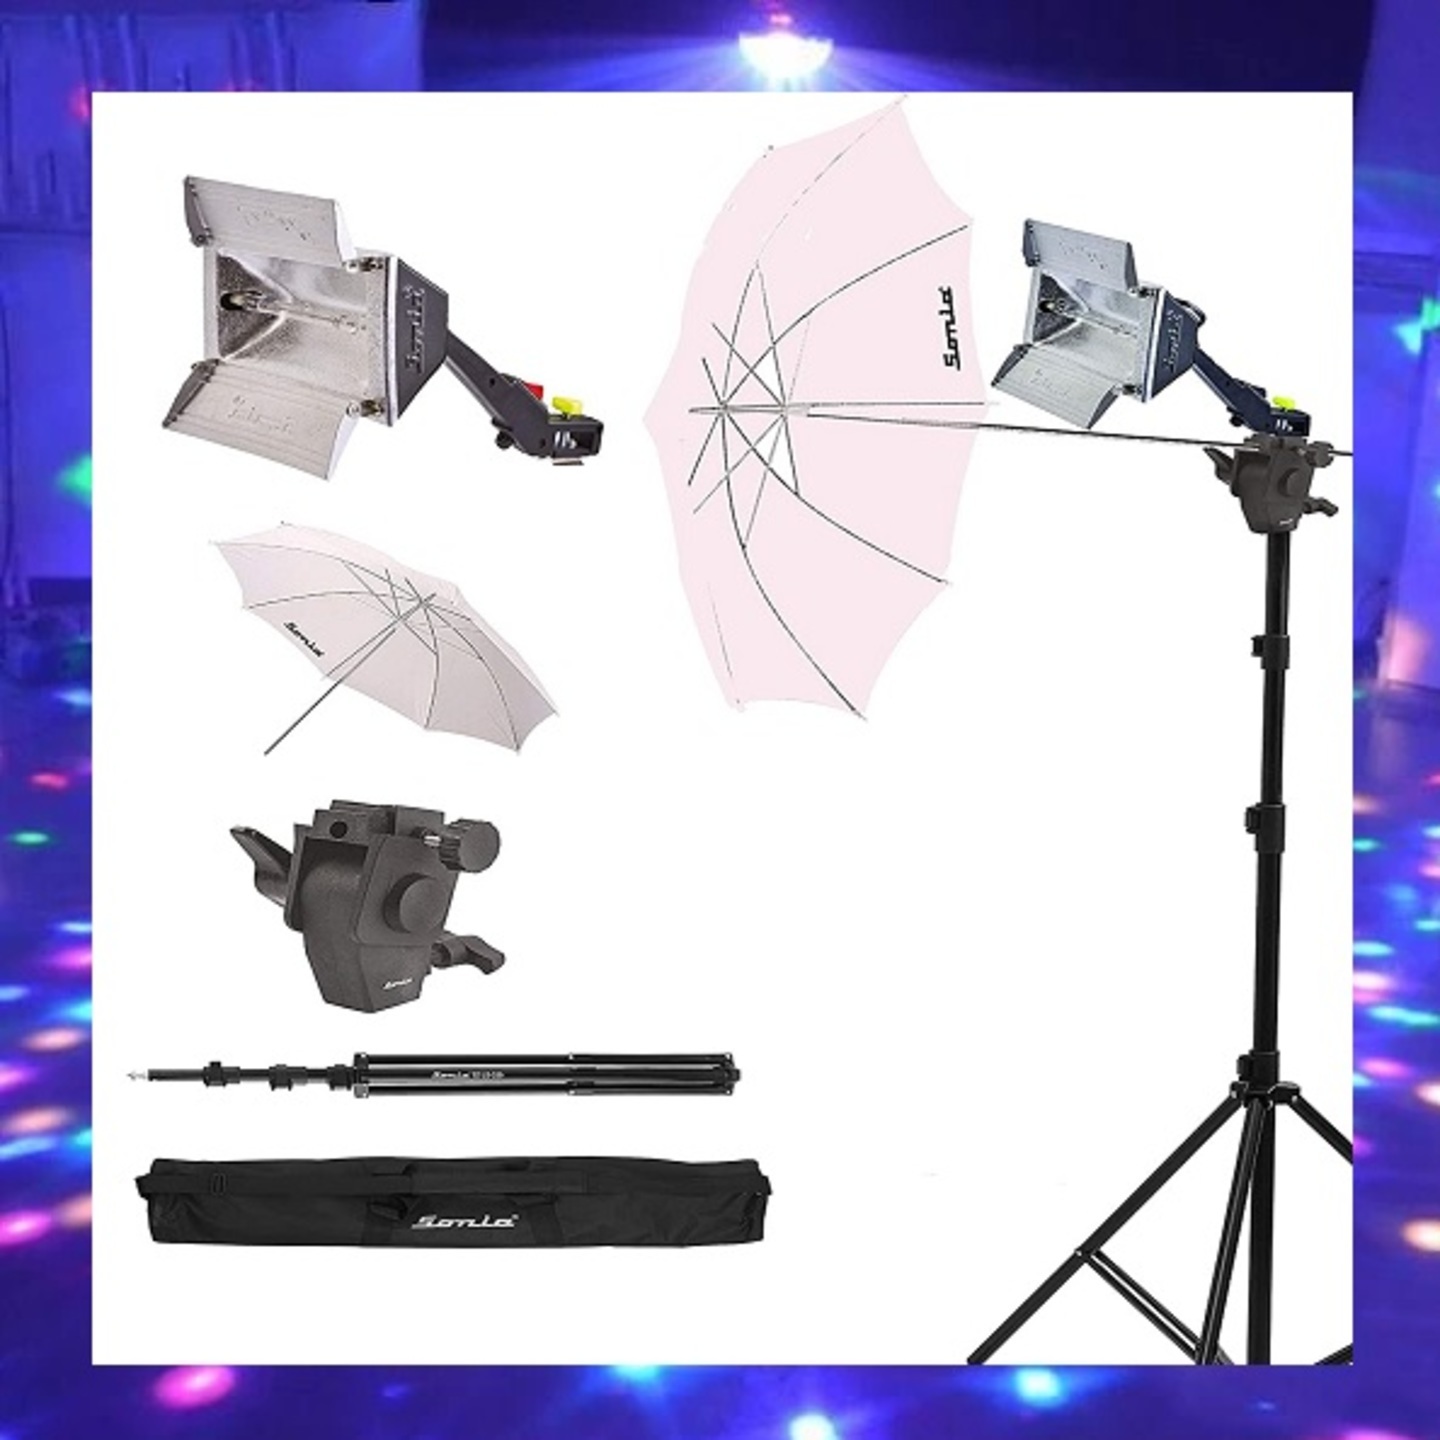 Rental Flood light & photography kit for parties